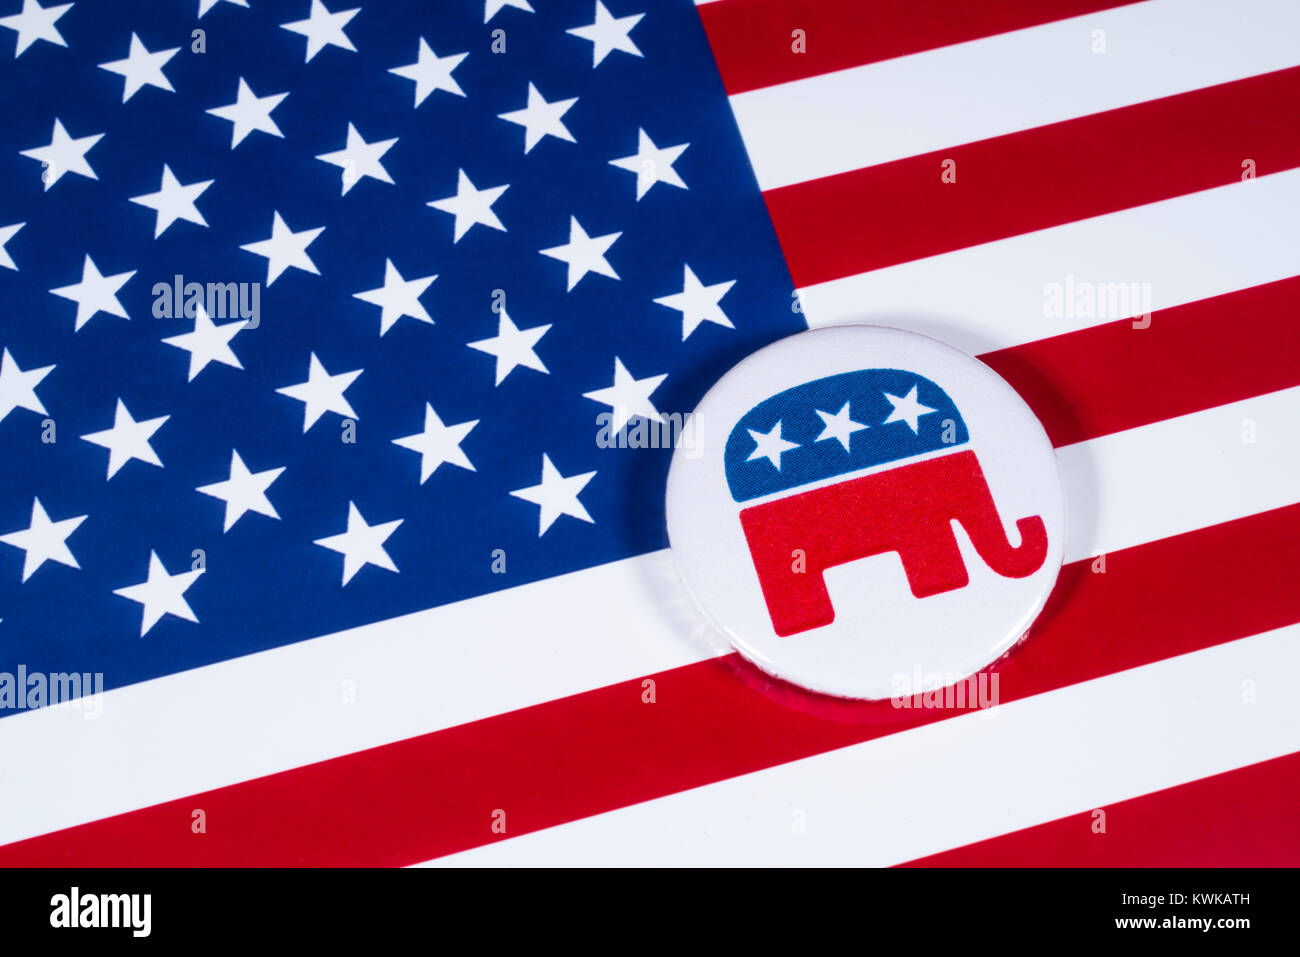 LONDON, UK - DECEMBER 18TH 2017: The Elephant symbol of the Republican Party, with the American flag behind it, on 18th December 2017. Stock Photo